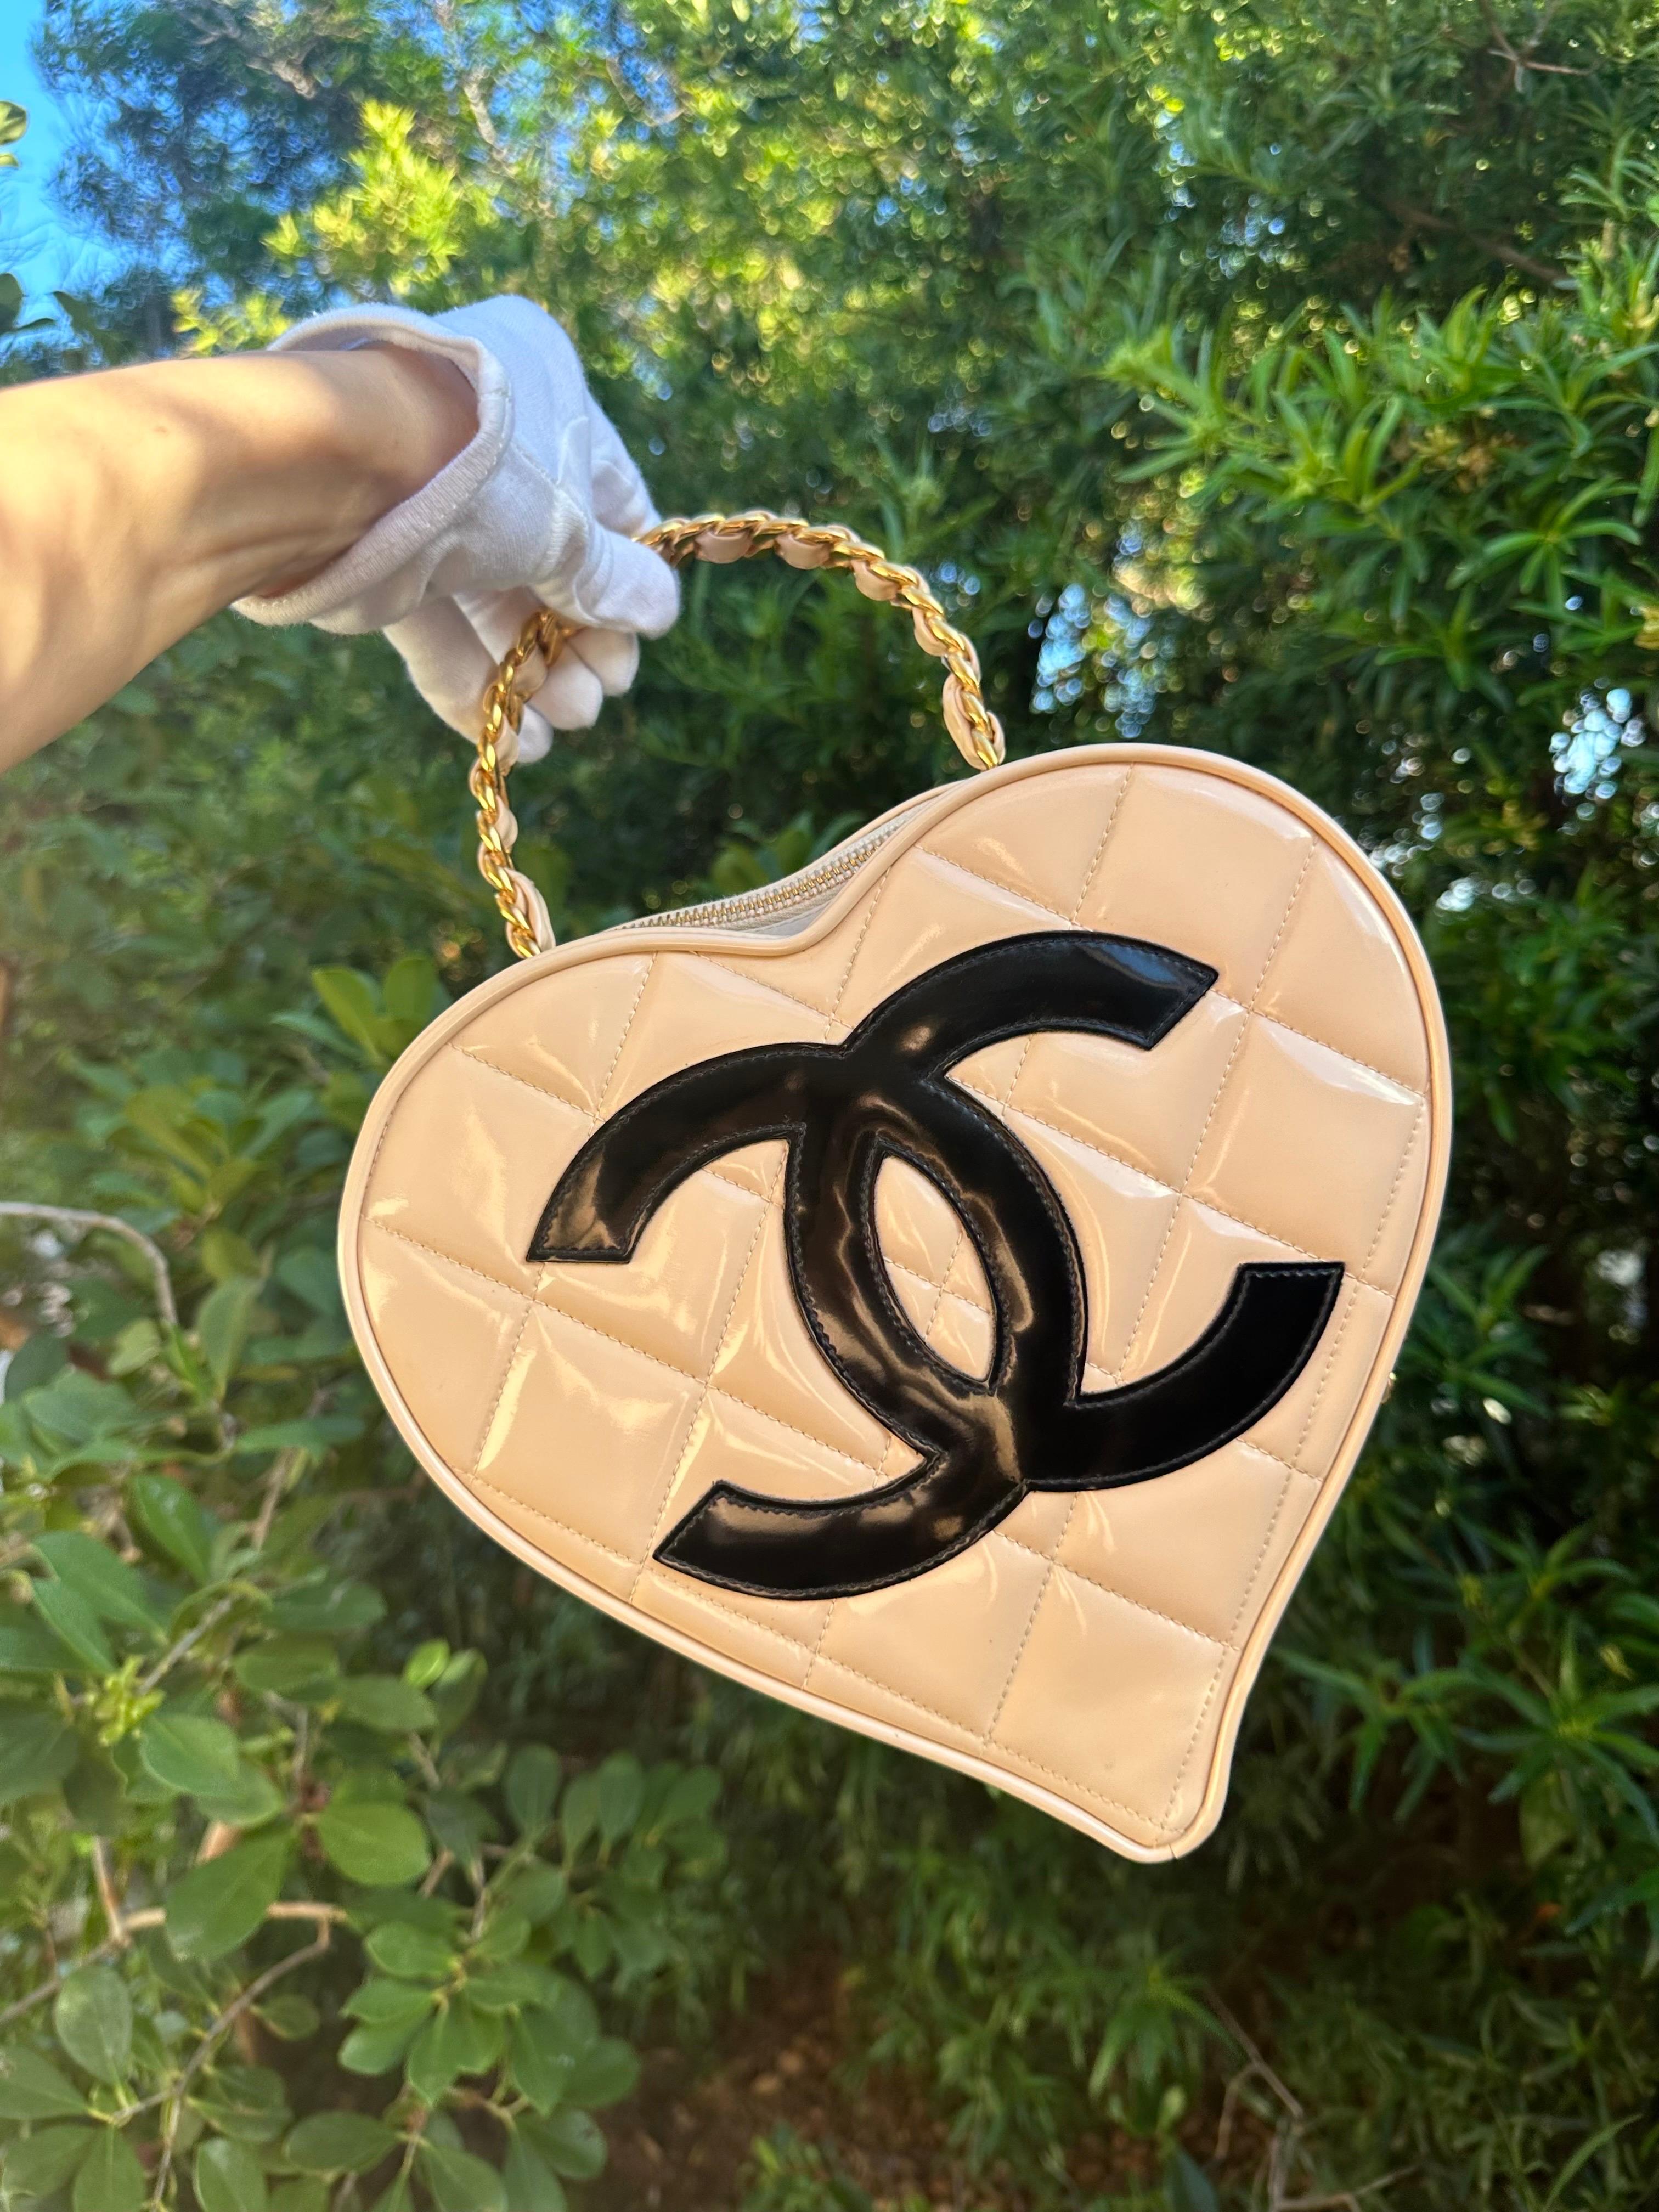 Chanel Vintage CC Heart vanity top-handle bag
Made in France

The ultimate collector piece. This item is in very good condition with some wear to note. There are some traces of use such as slight darkening on the exterior. Please see photos/video